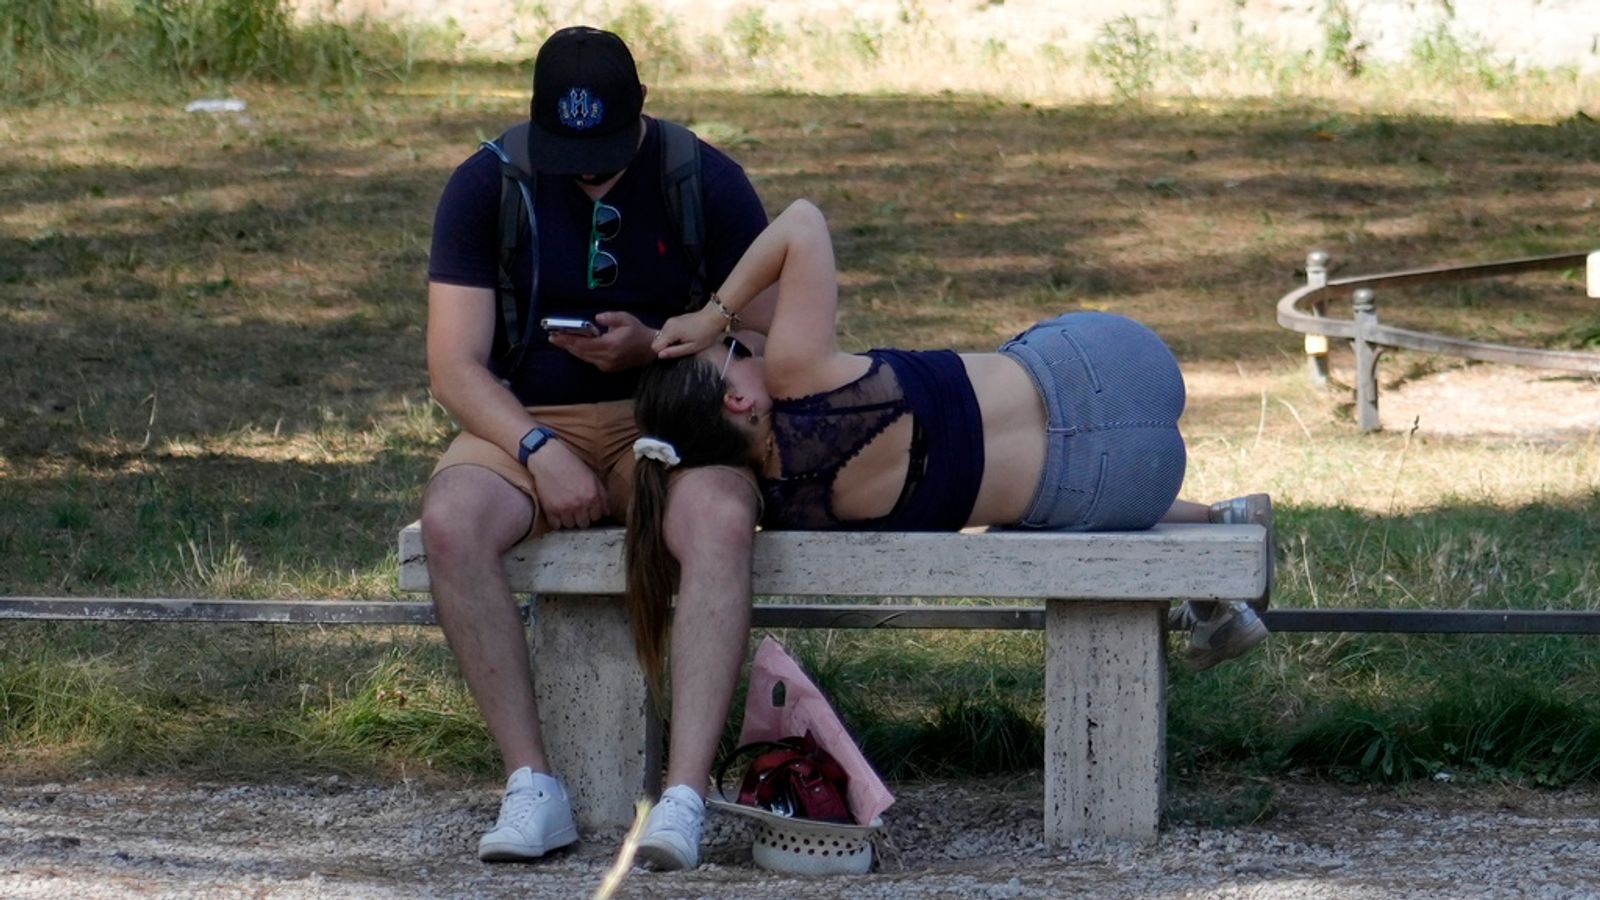 'Italy no longer has four seasons': Intense heatwave grips the country